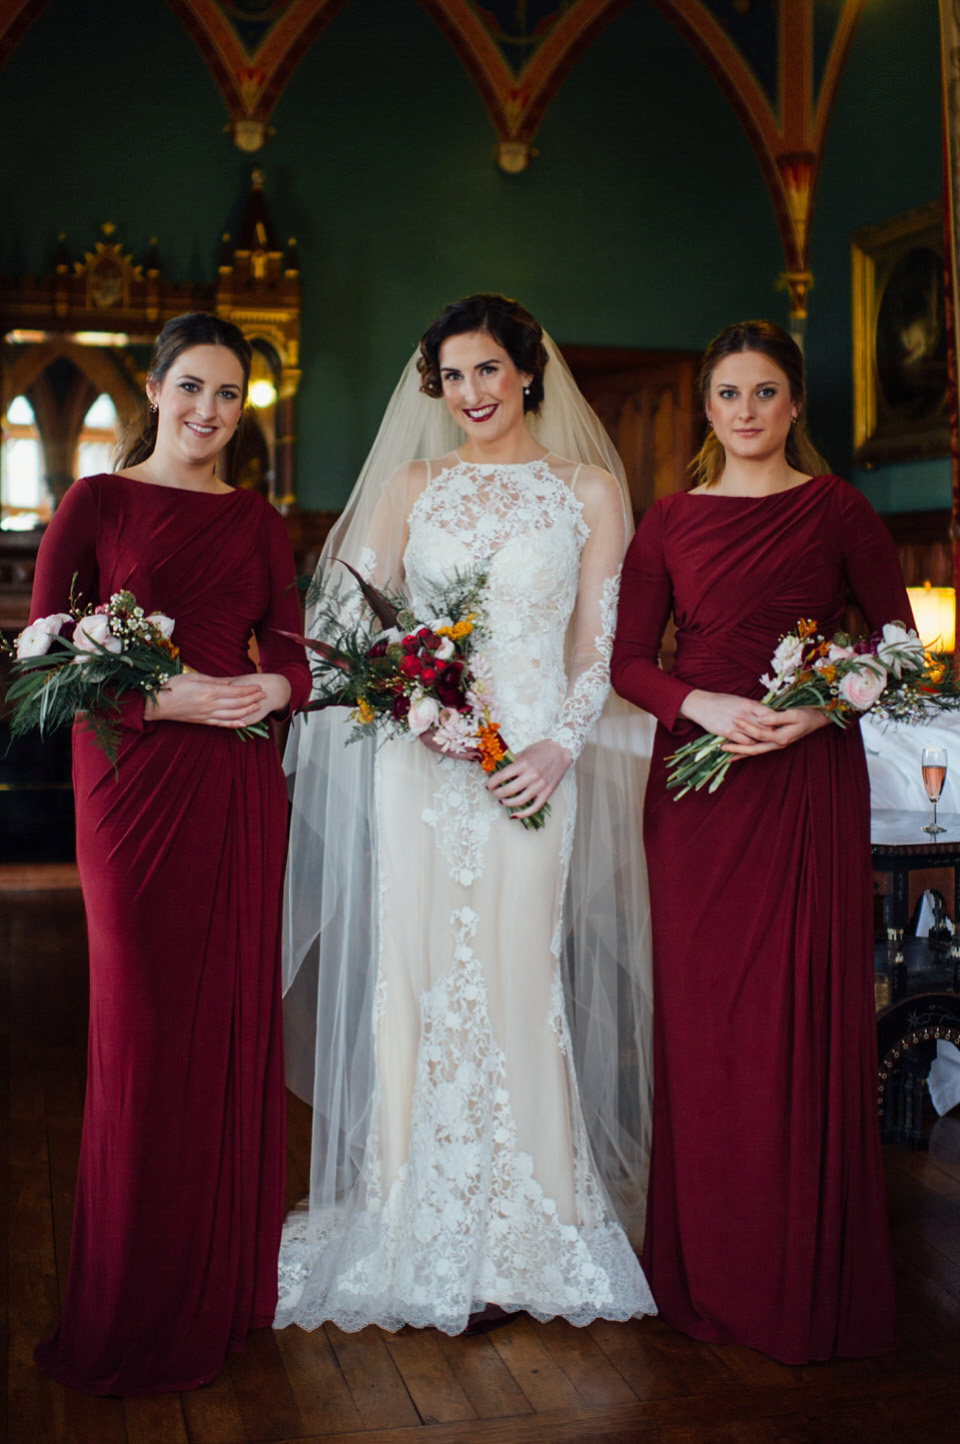 Mount Stuart Isle of Bute, Wedding in Scotland, YolanCri wedding dress, Hollywood glamour inspired bride, bride in red lipstick, burgundy bridesmaids dresses, Humanist wedding // All images by Lisa Devine Photography.